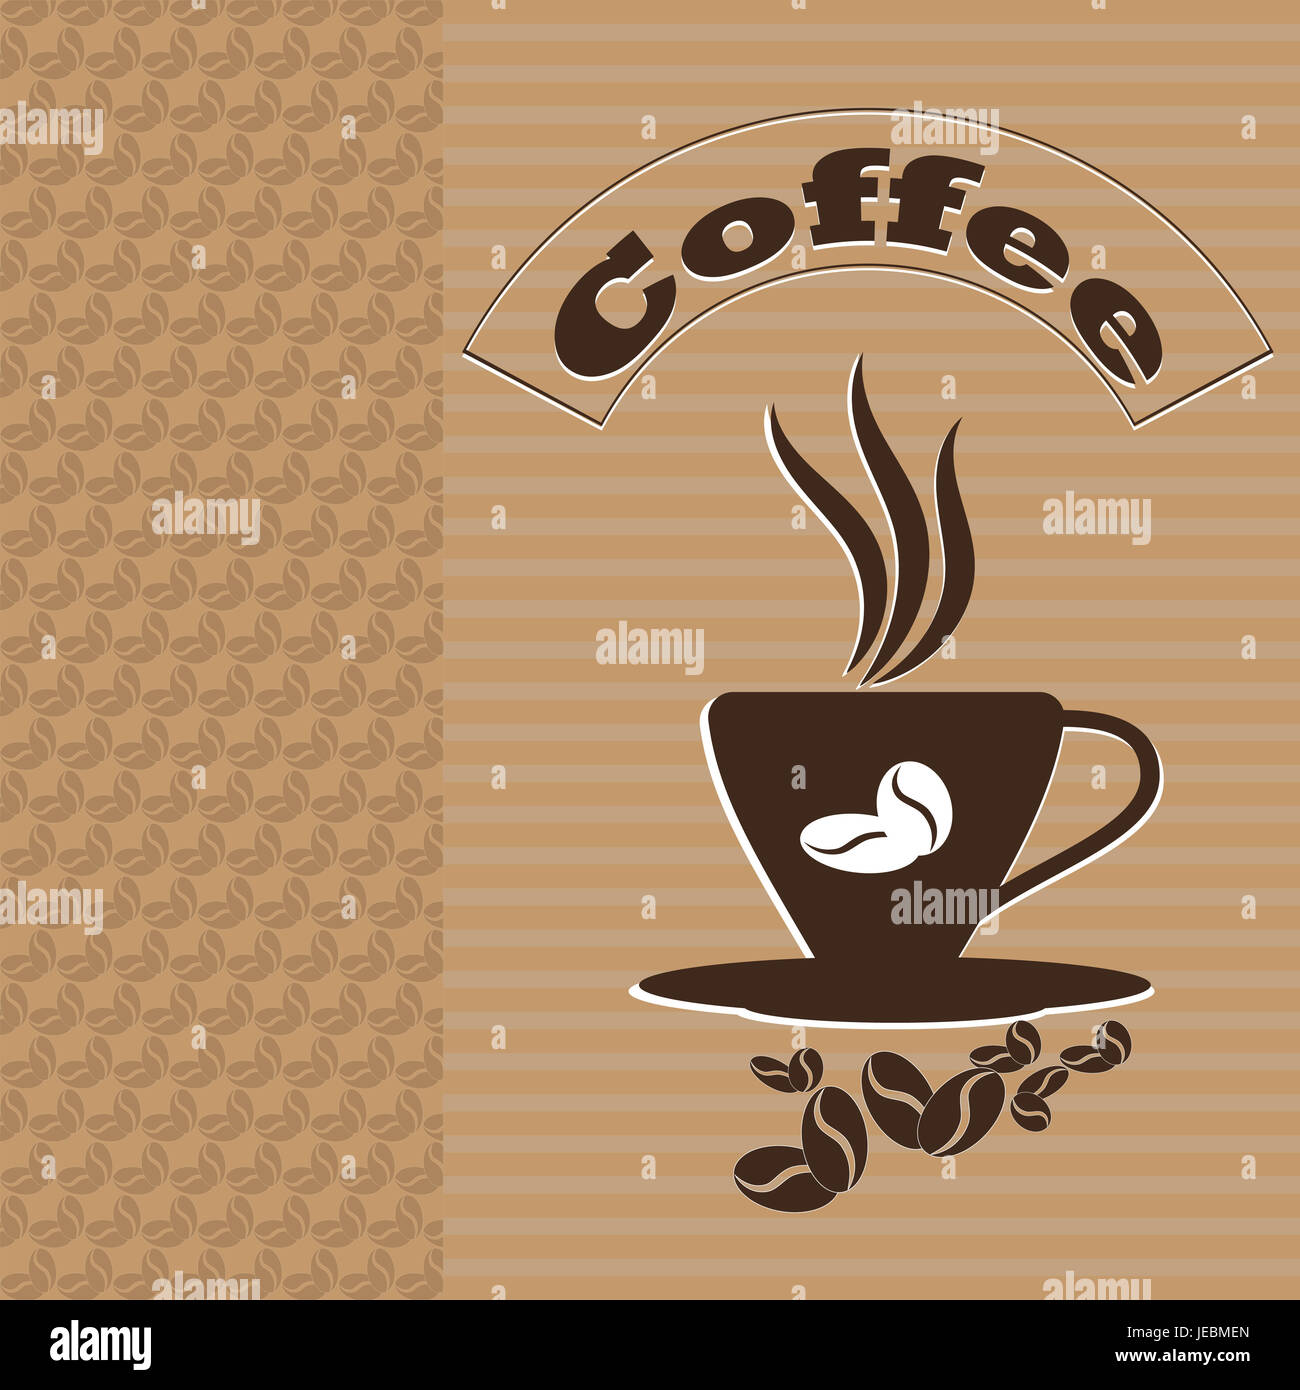 Card themes coffee, cup of coffee banner background Stock Photo - Alamy